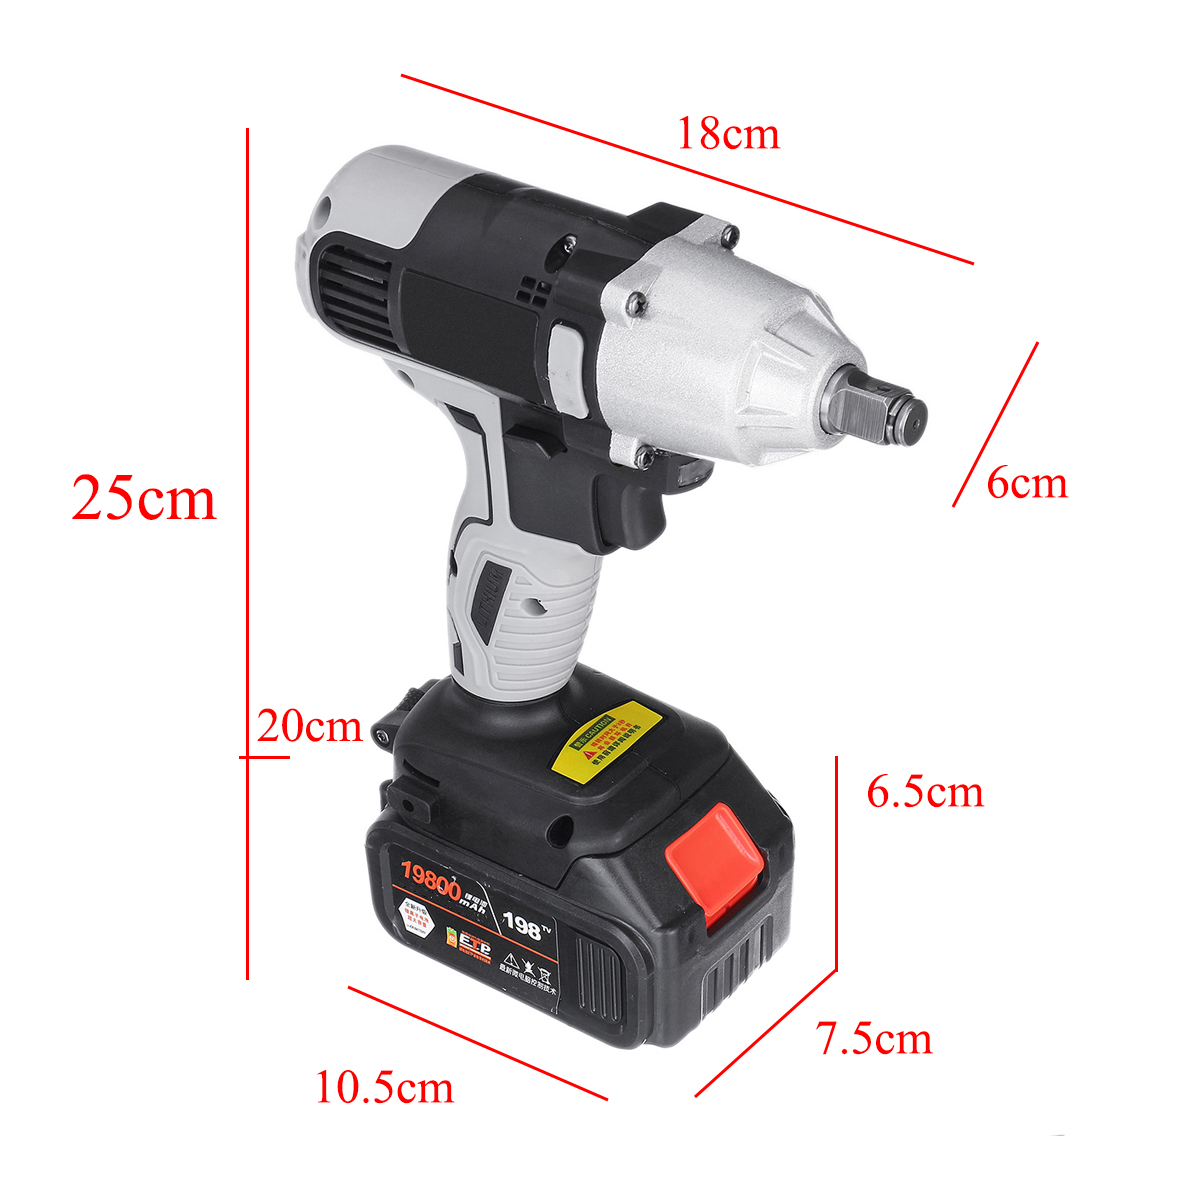 19800mAh-Lithium-Battery-Wrench-Multifunctional-300Nm-Electric-Cordless-Impact-Wrench-1449387-5